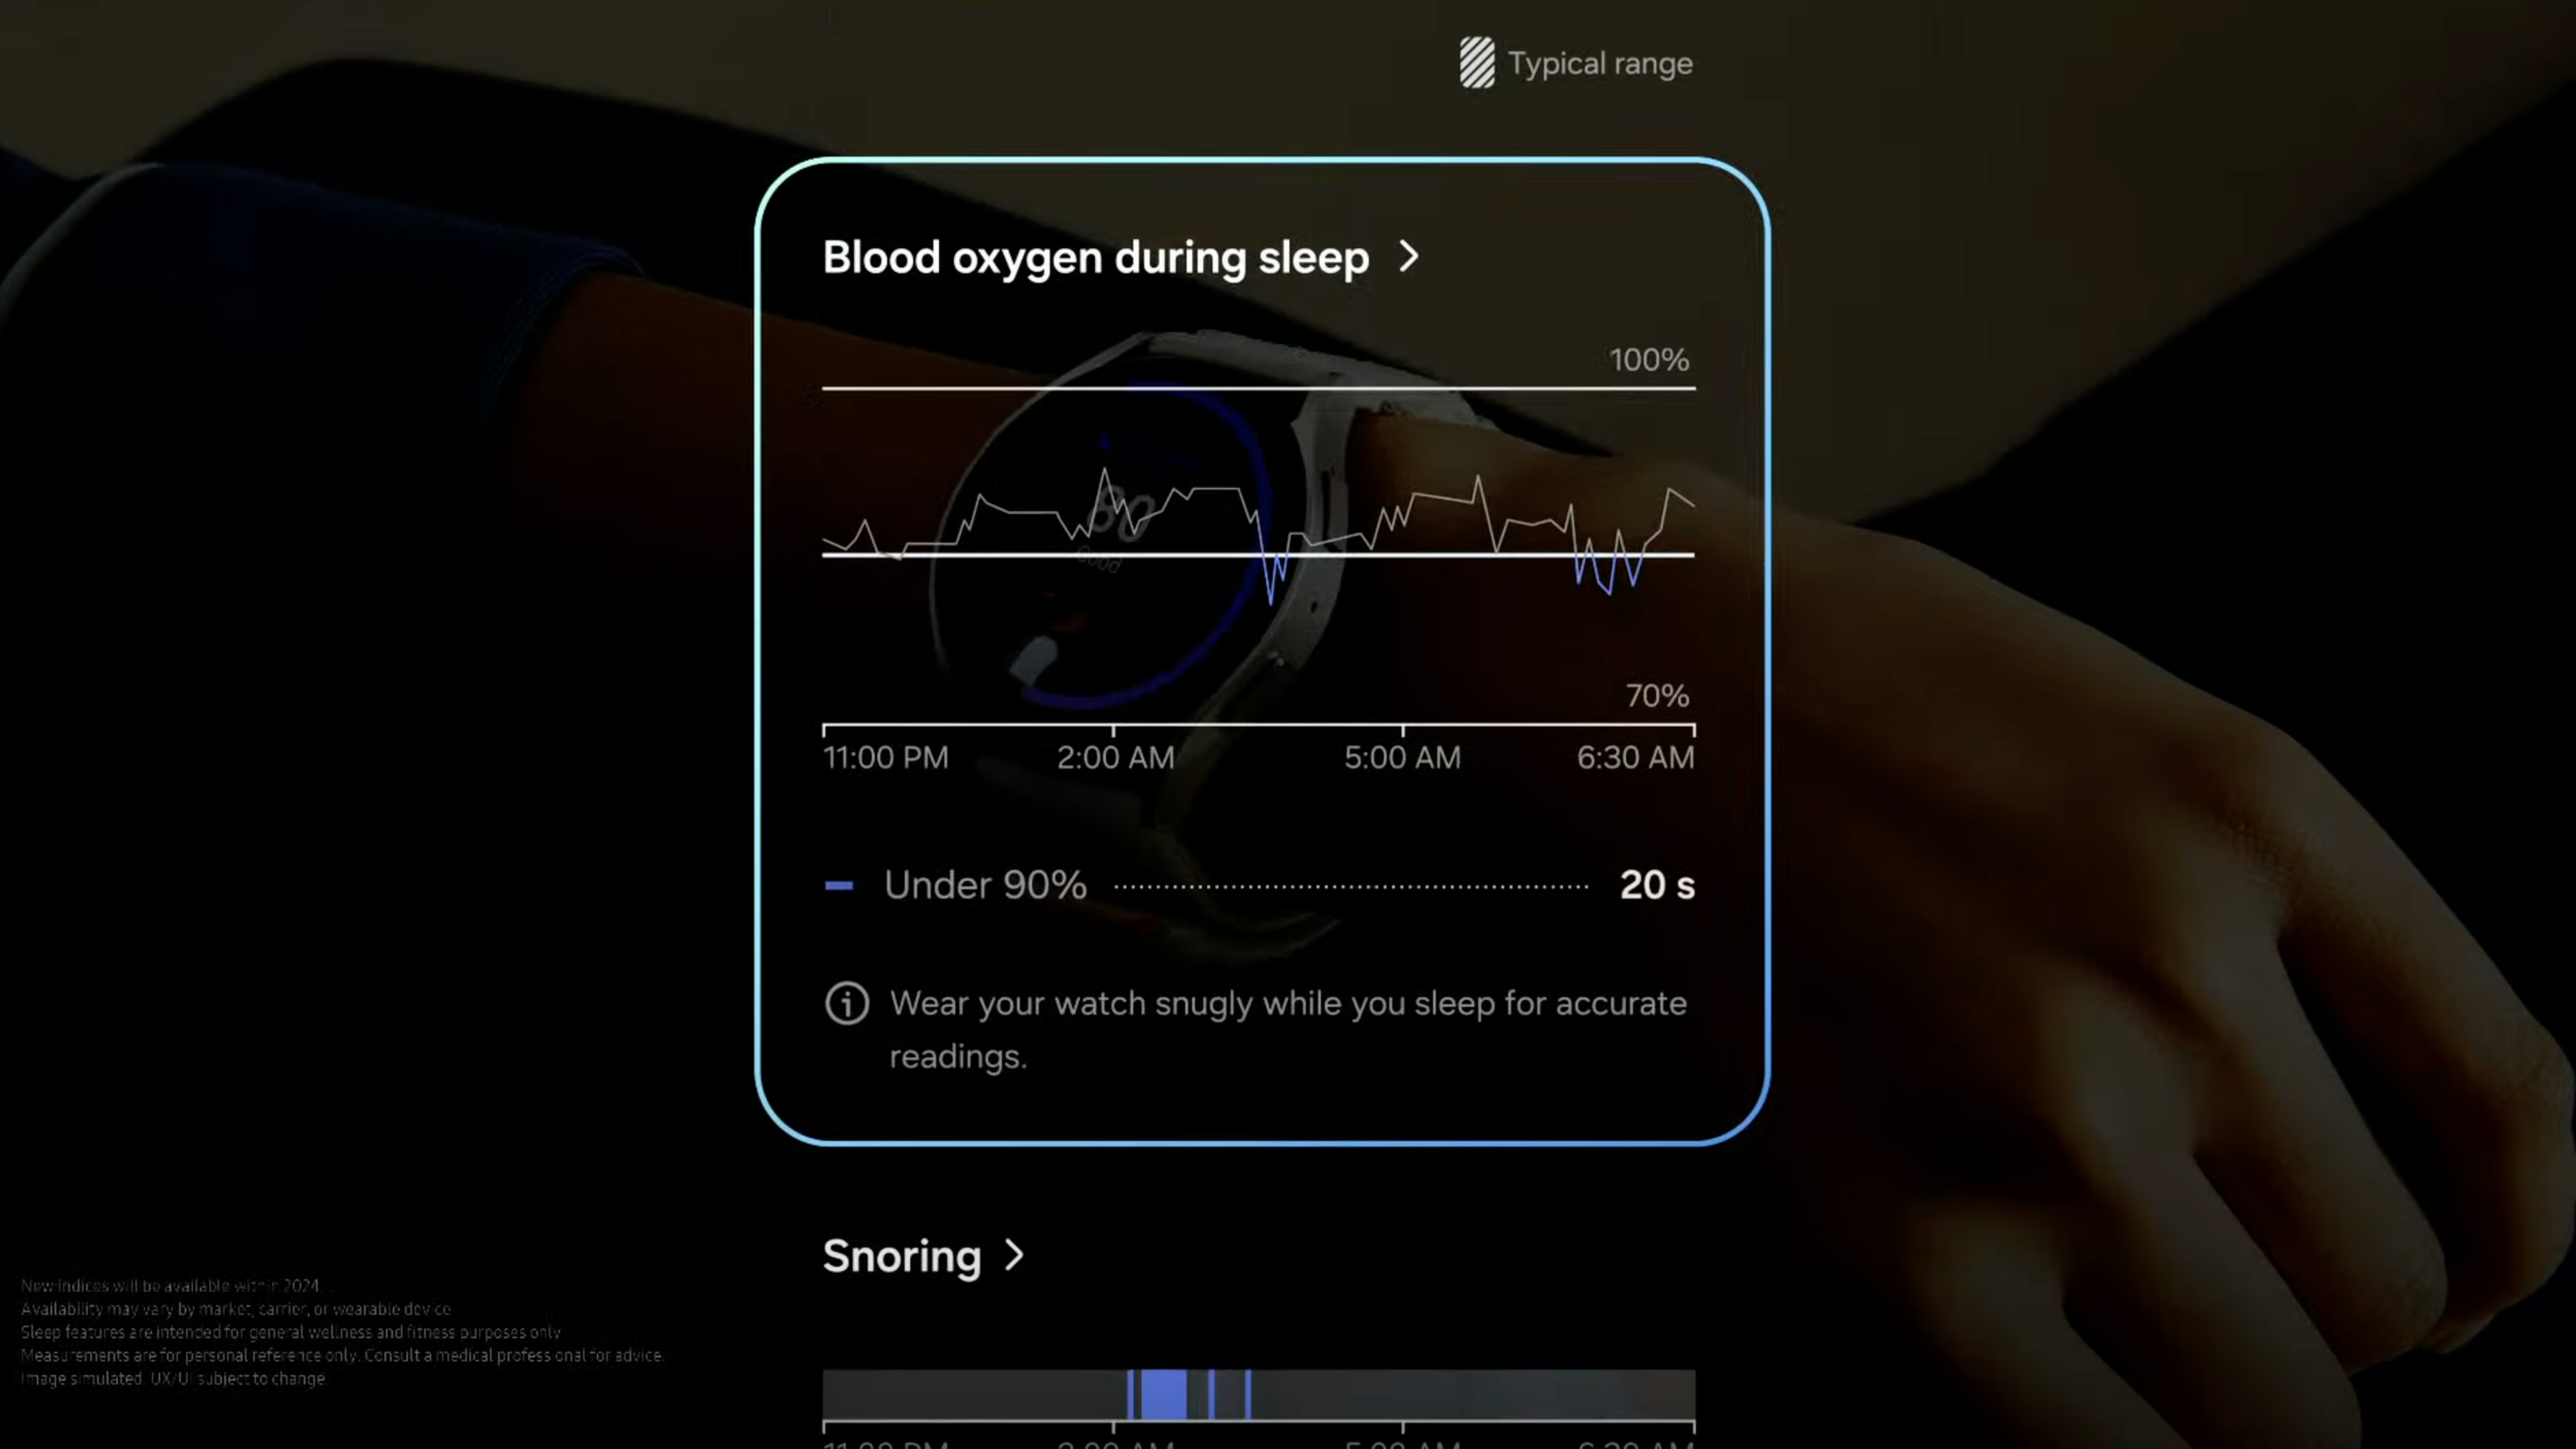 Samsung Health features on a phone screen